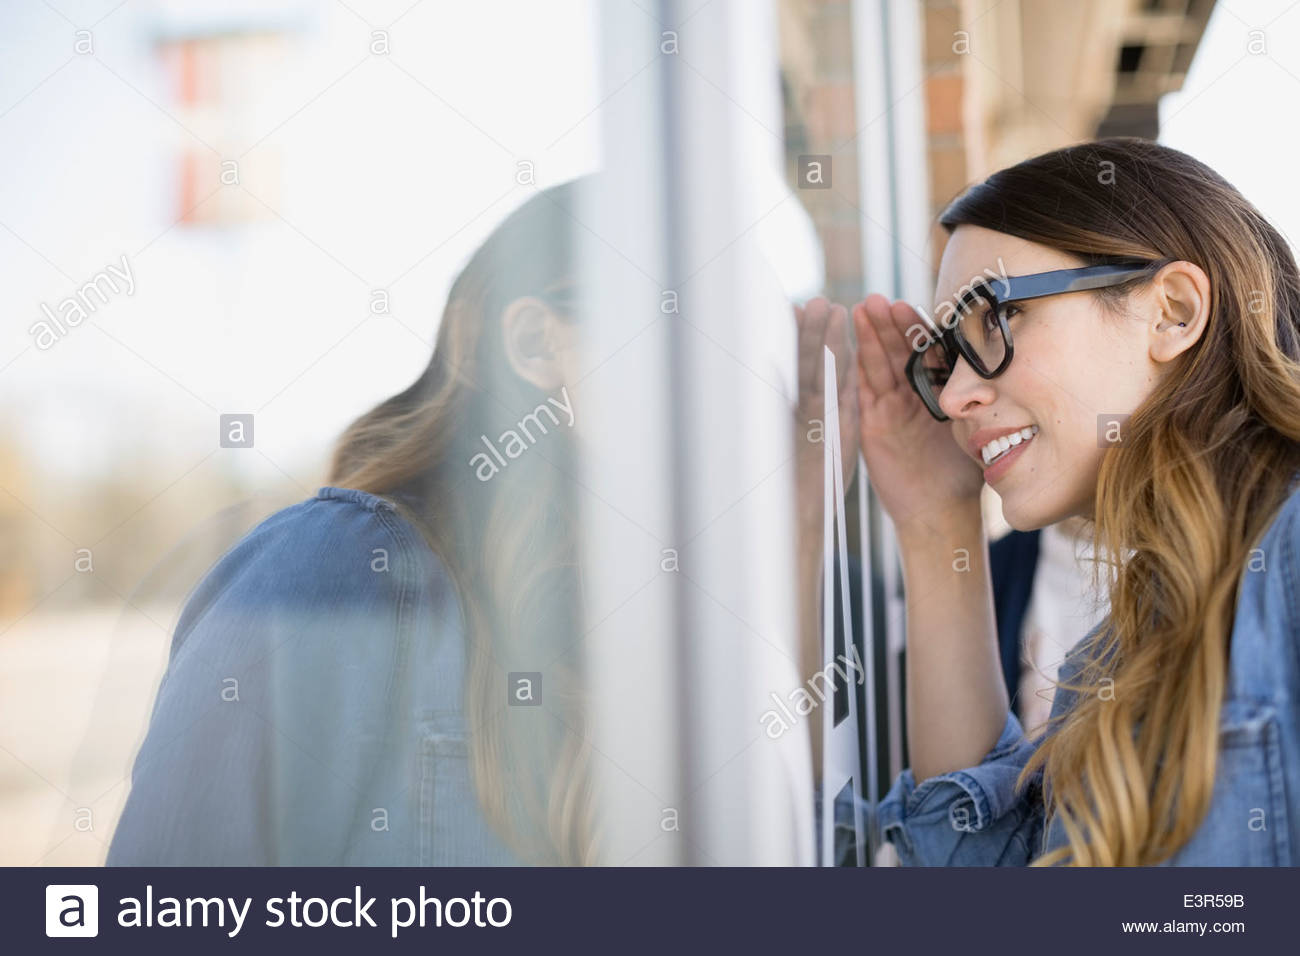 Woman window shopping at storefront Stock Photo